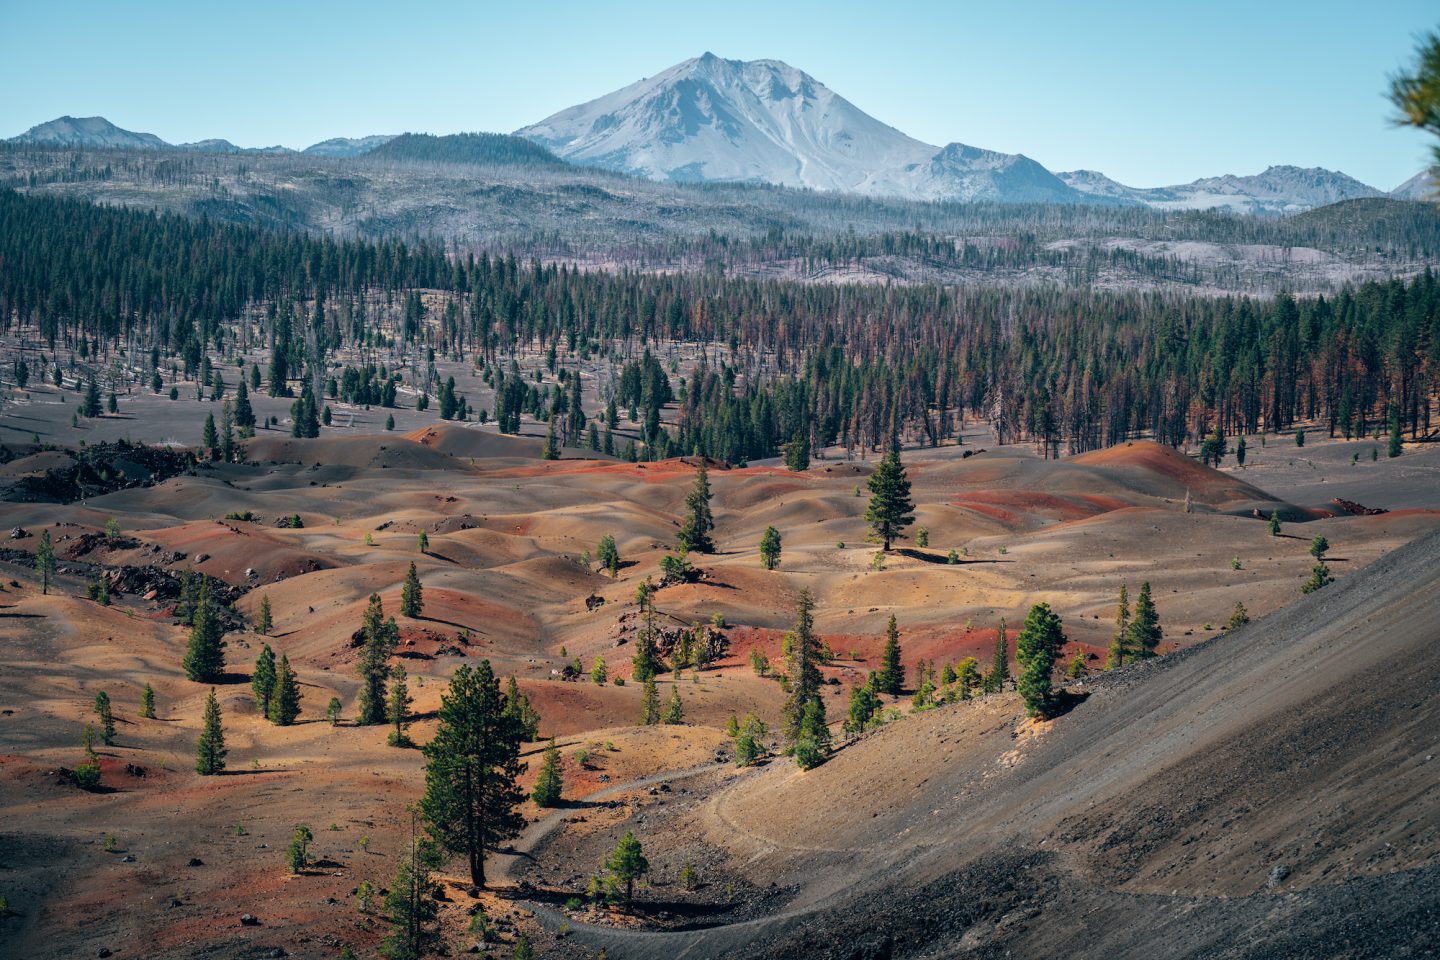 Painted Dunes from Cinder Cone - Lassen Volcanic National Park